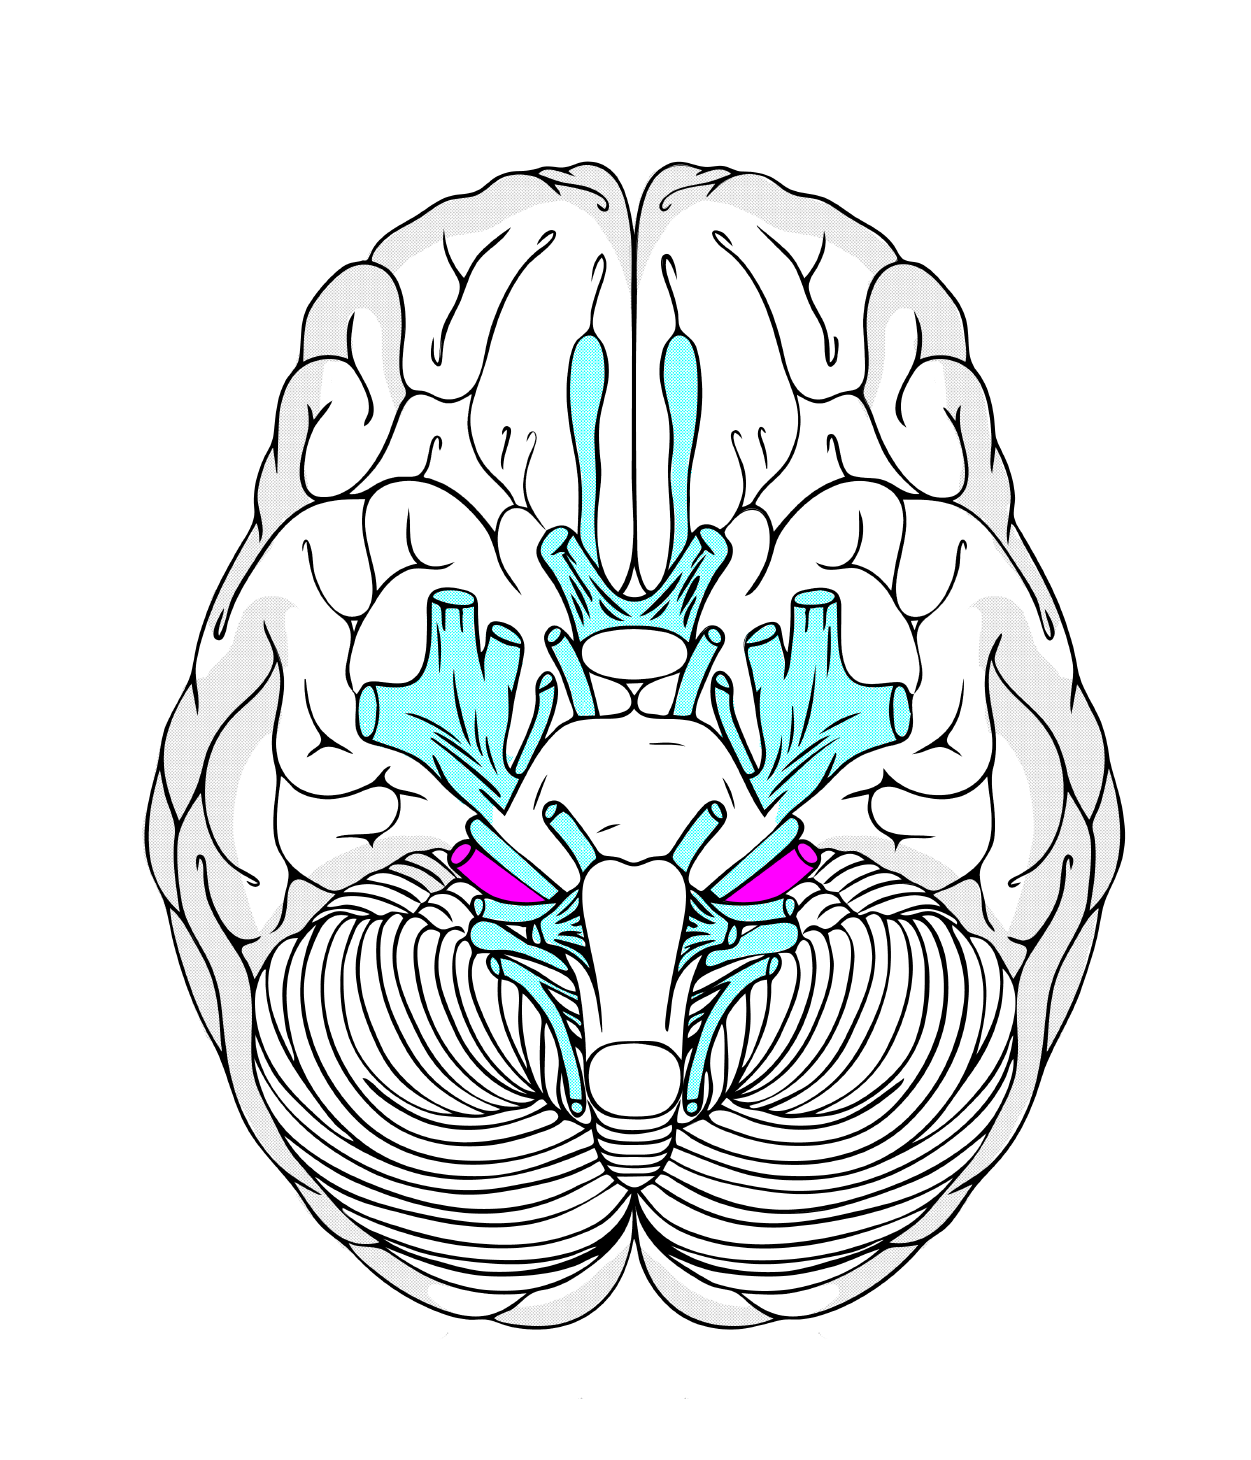 Cranial Nerve VIII (auditory nerve in red)